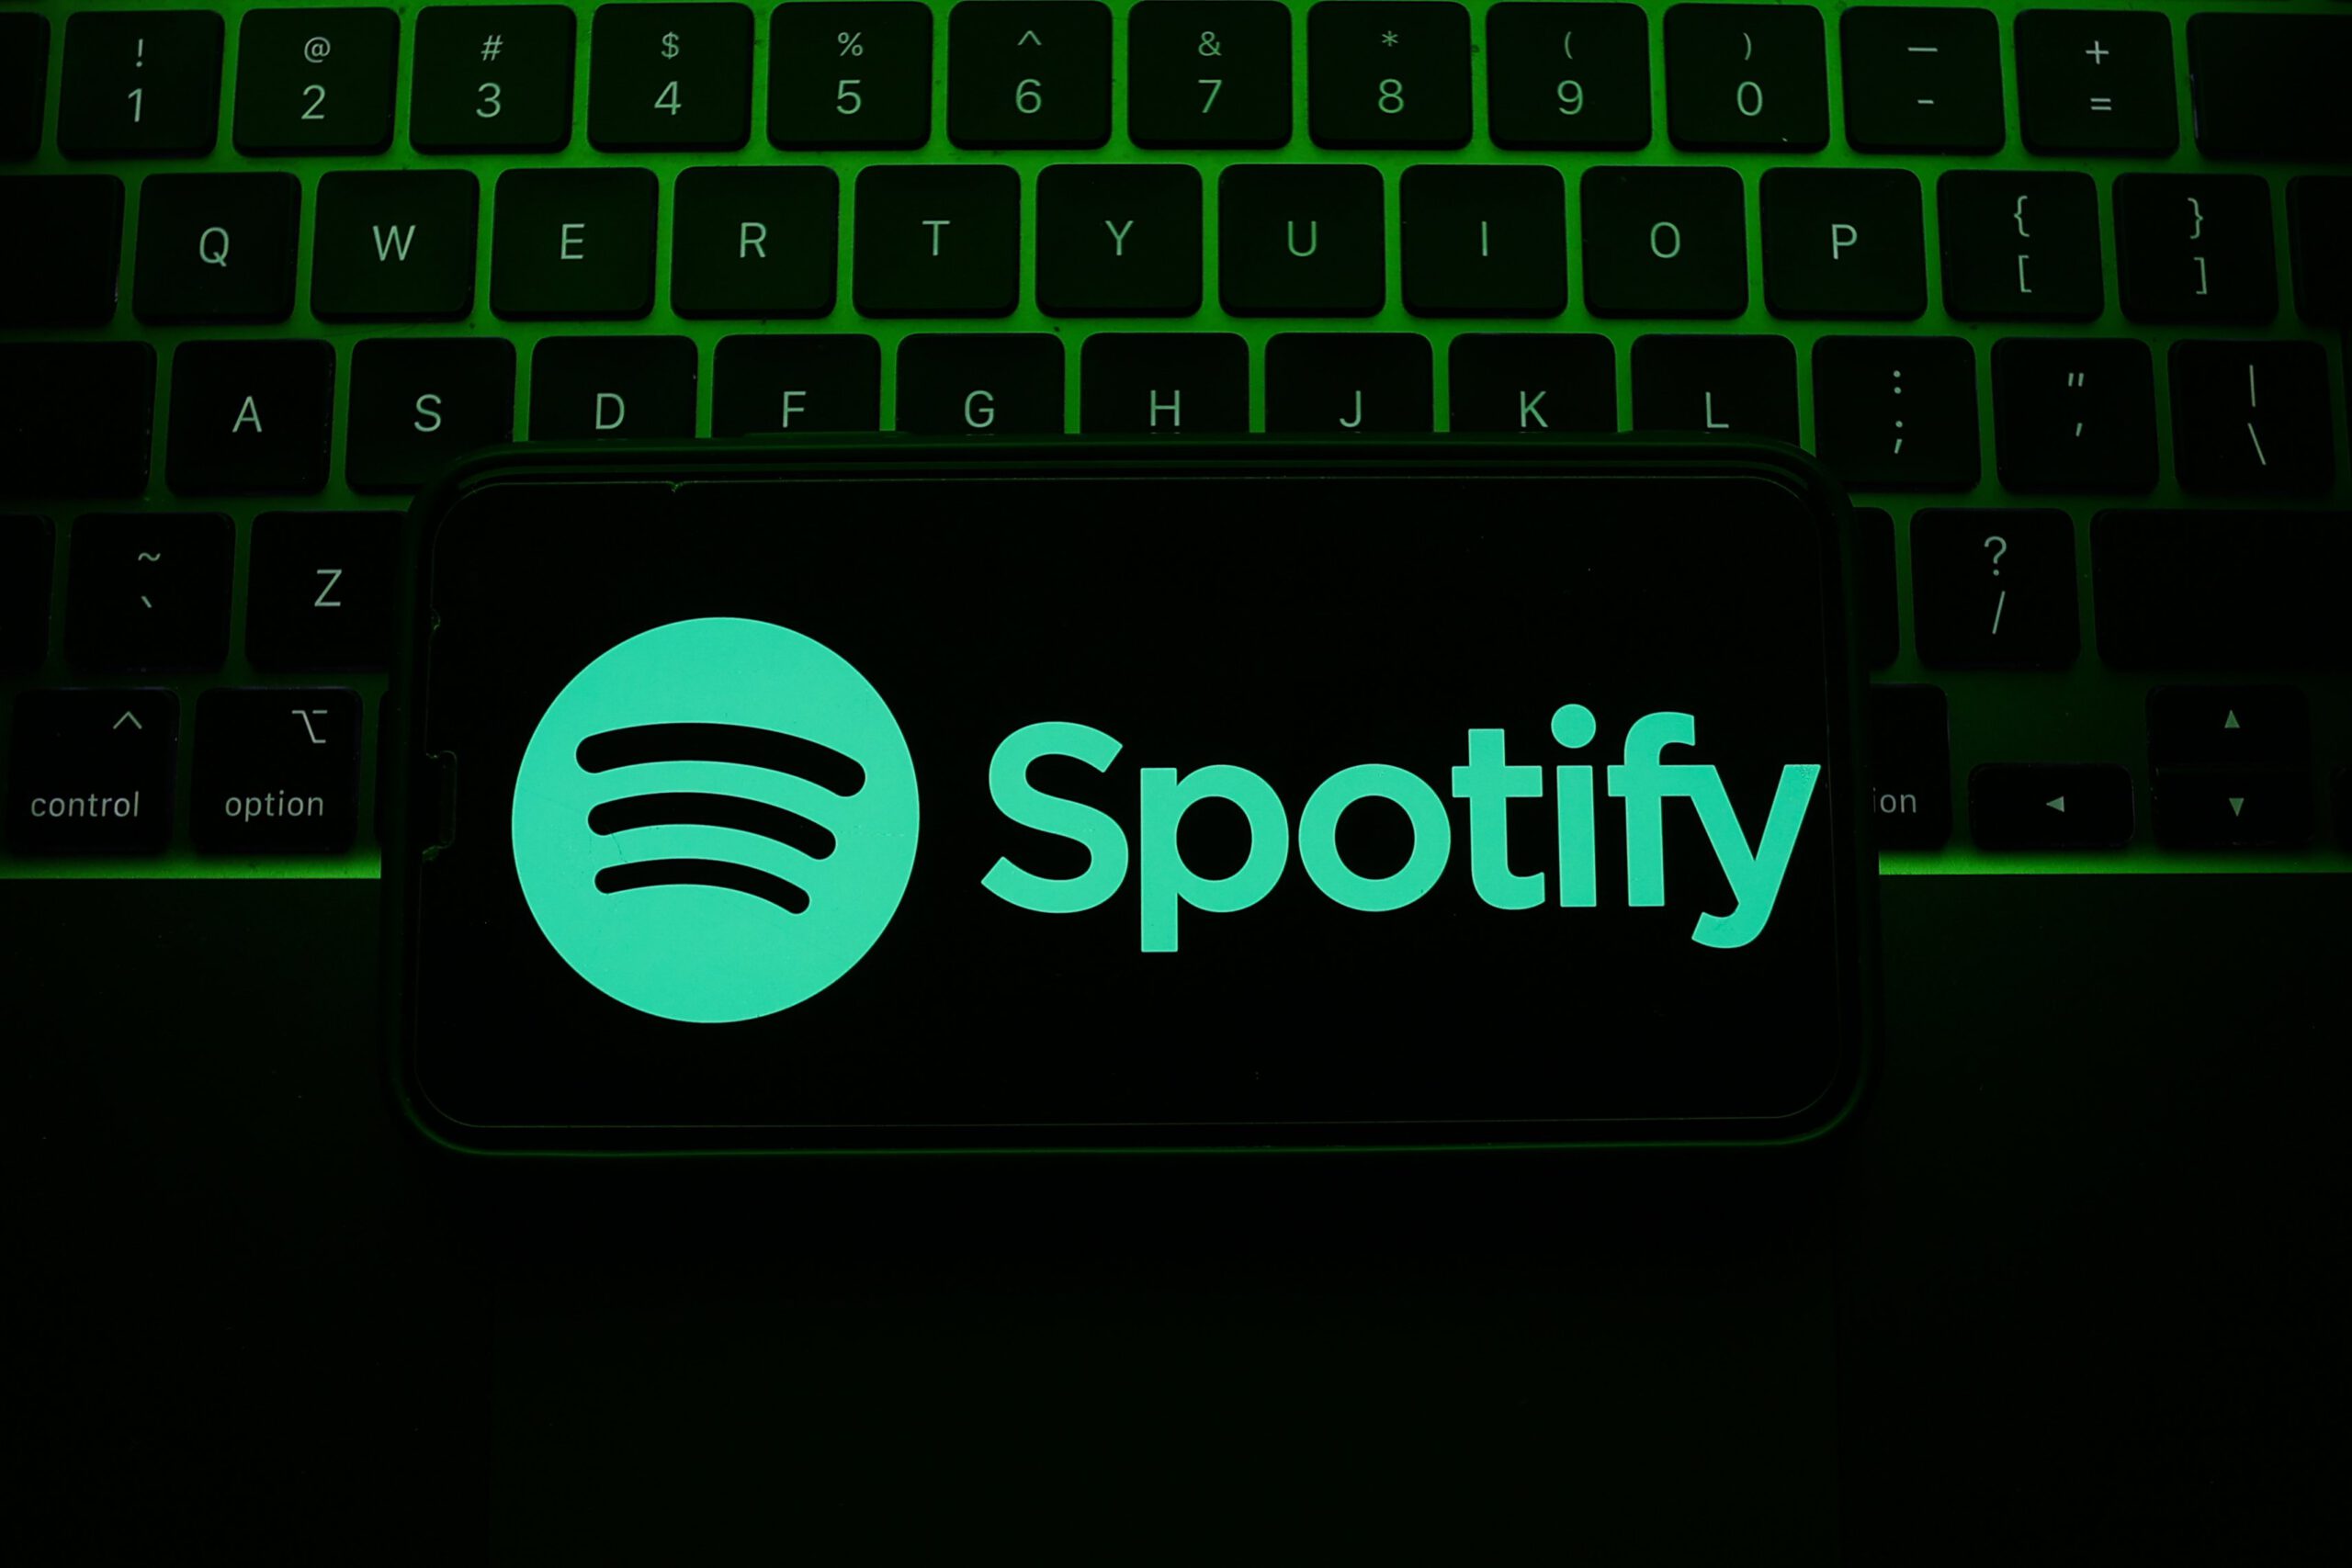 A laptop keyboard and Spotify logo displayed on a phone screen are seen in this illustration photo.